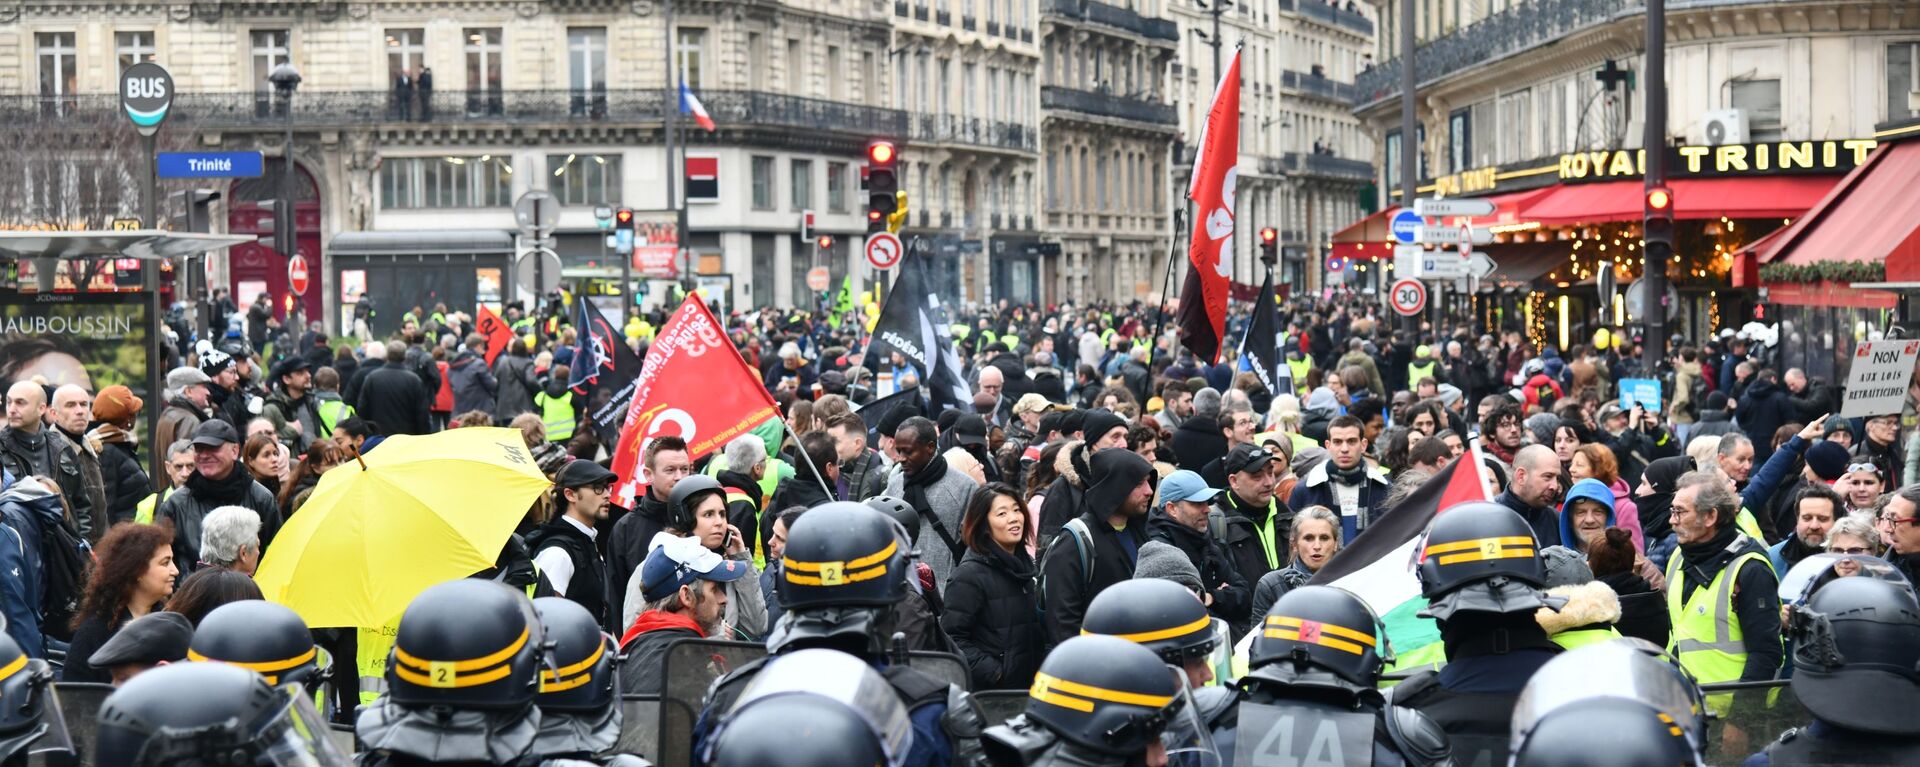 Protesters face off with CRS riot police during a demonstration as part of the 36th consecutive day of strike against French government's pensions reform plans, in Paris, France. - Sputnik International, 1920, 29.09.2022